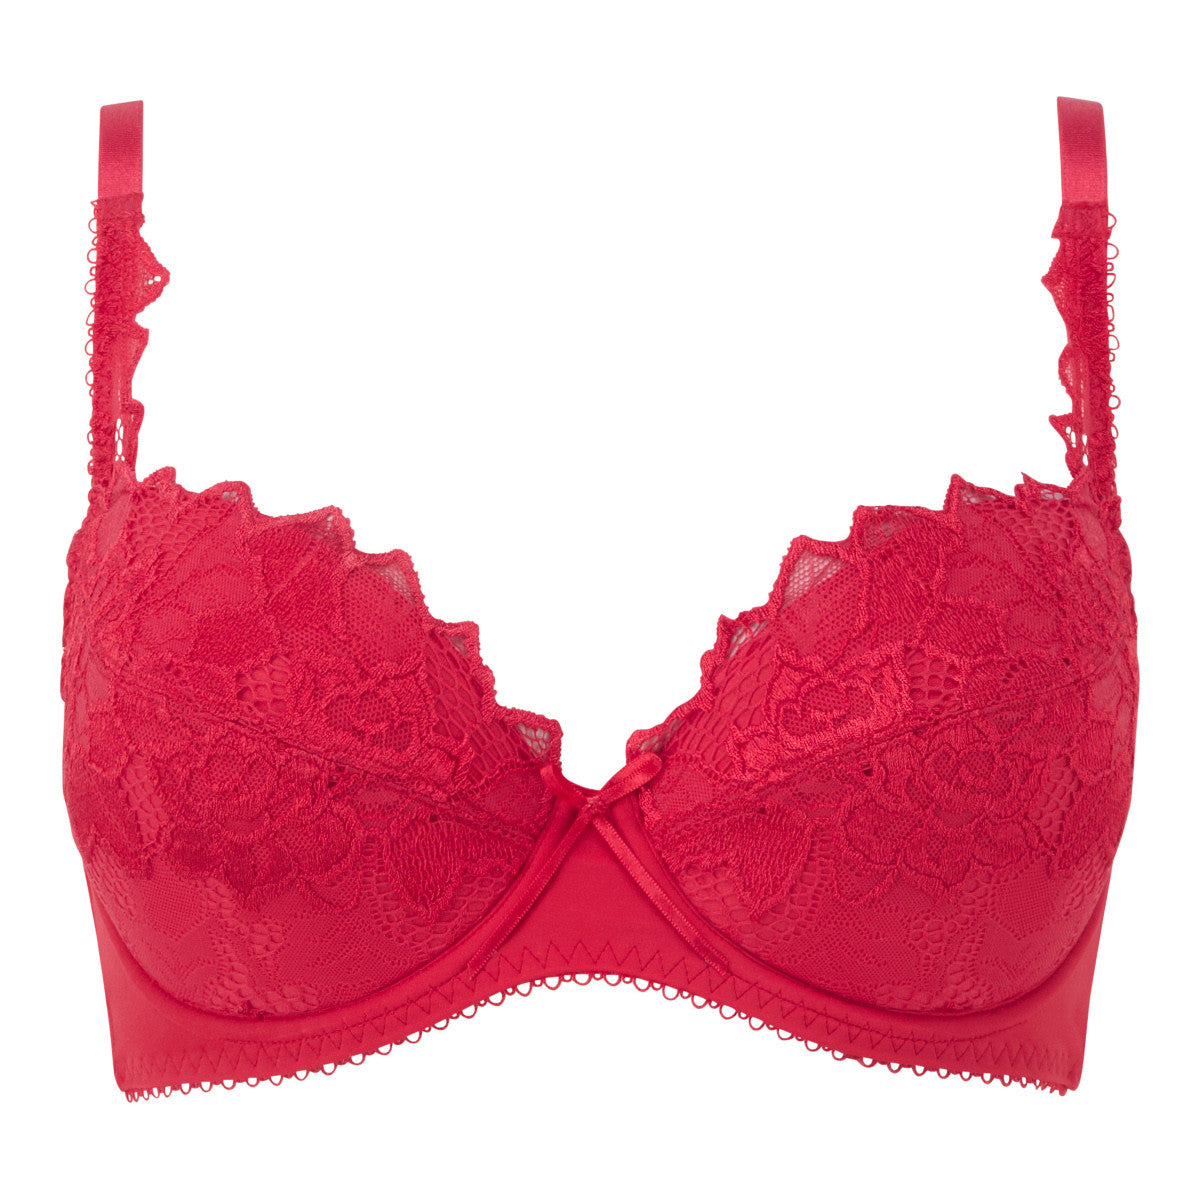 Bra Clearance Cheap Discounted Bras - Buy Now Tagged 